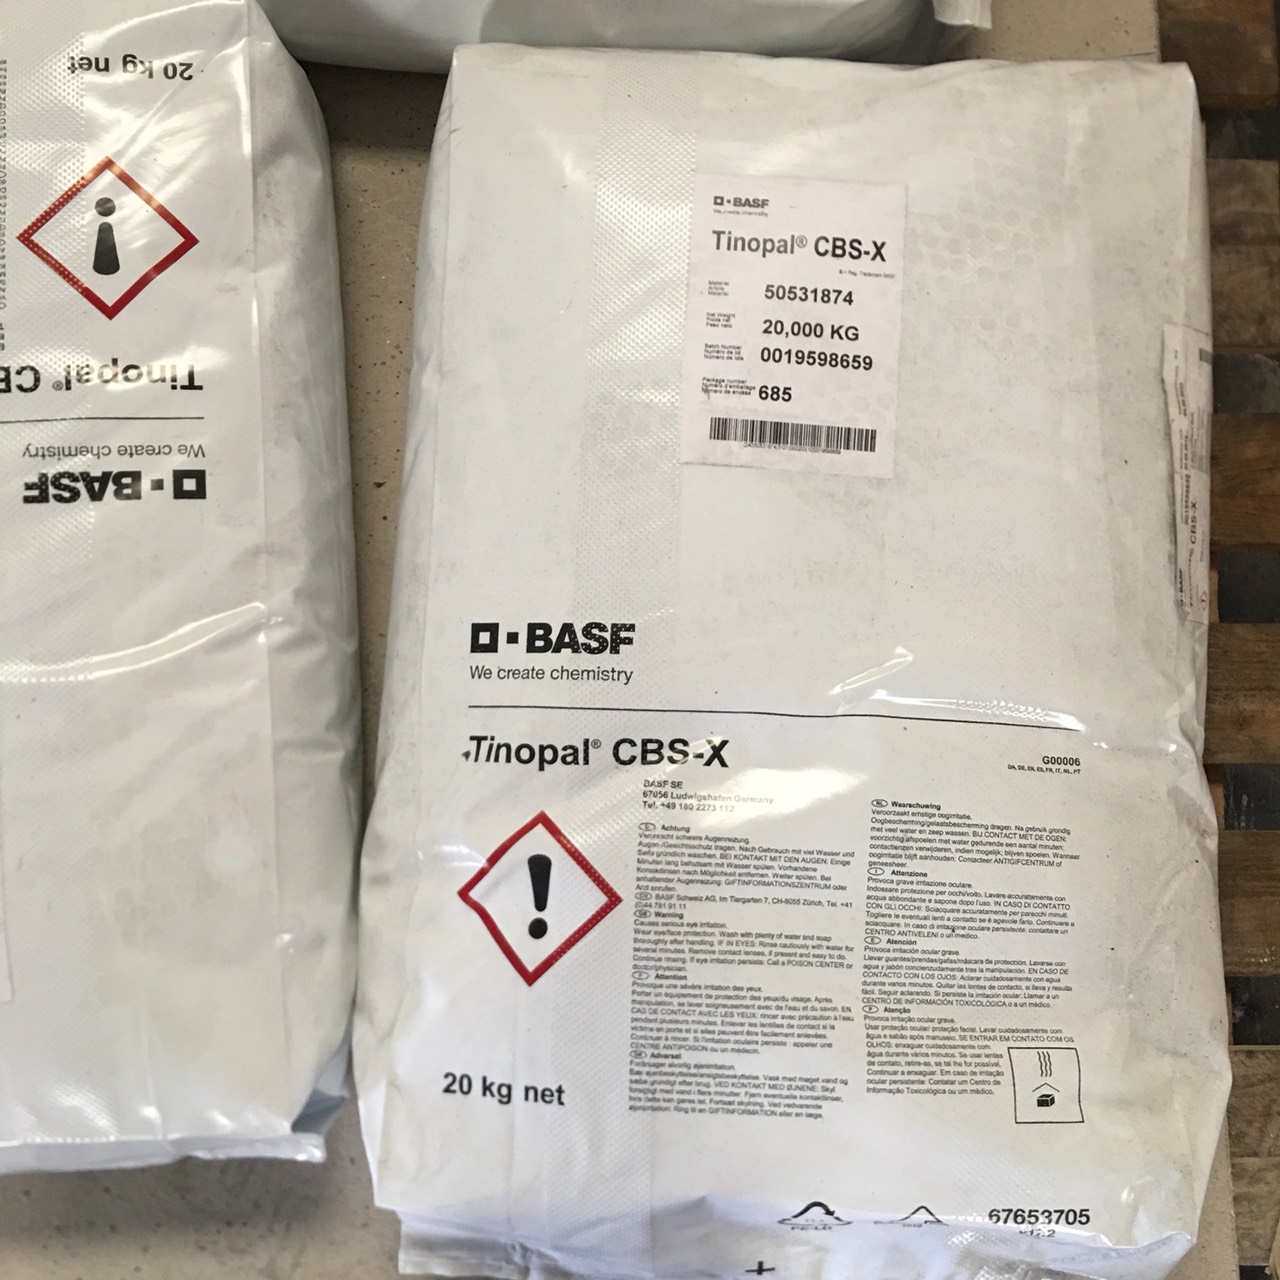 Tinopal Cbs X Thanant Chemical Co Ltd Has Become One Of The Leading Distributors Of Basf Germany Throughout Thailand By Sticking Closely To Its Fundamental Premises We Work Together With The Customers